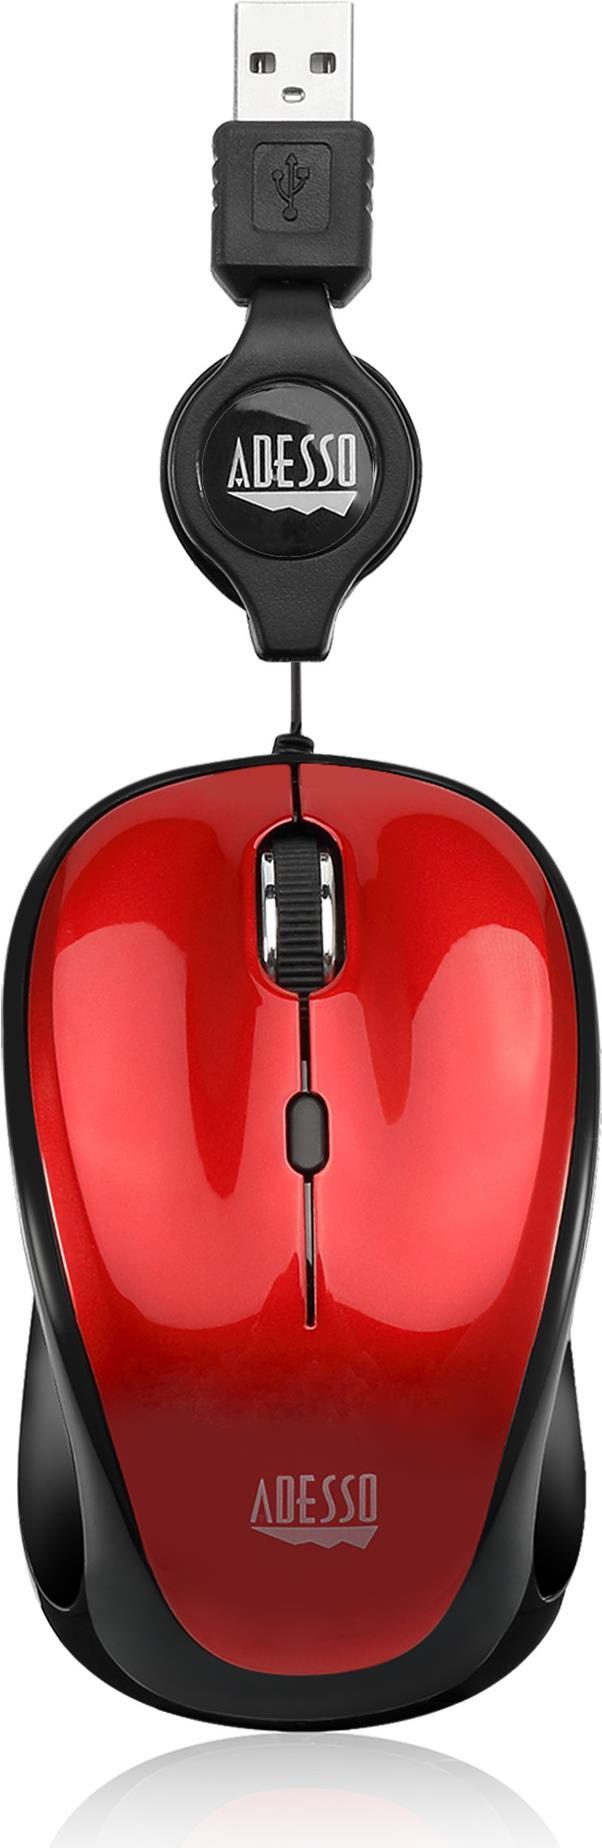 Adesso einziehbare Nano mouse (Red), iMouse S8R (iMouse S8R)